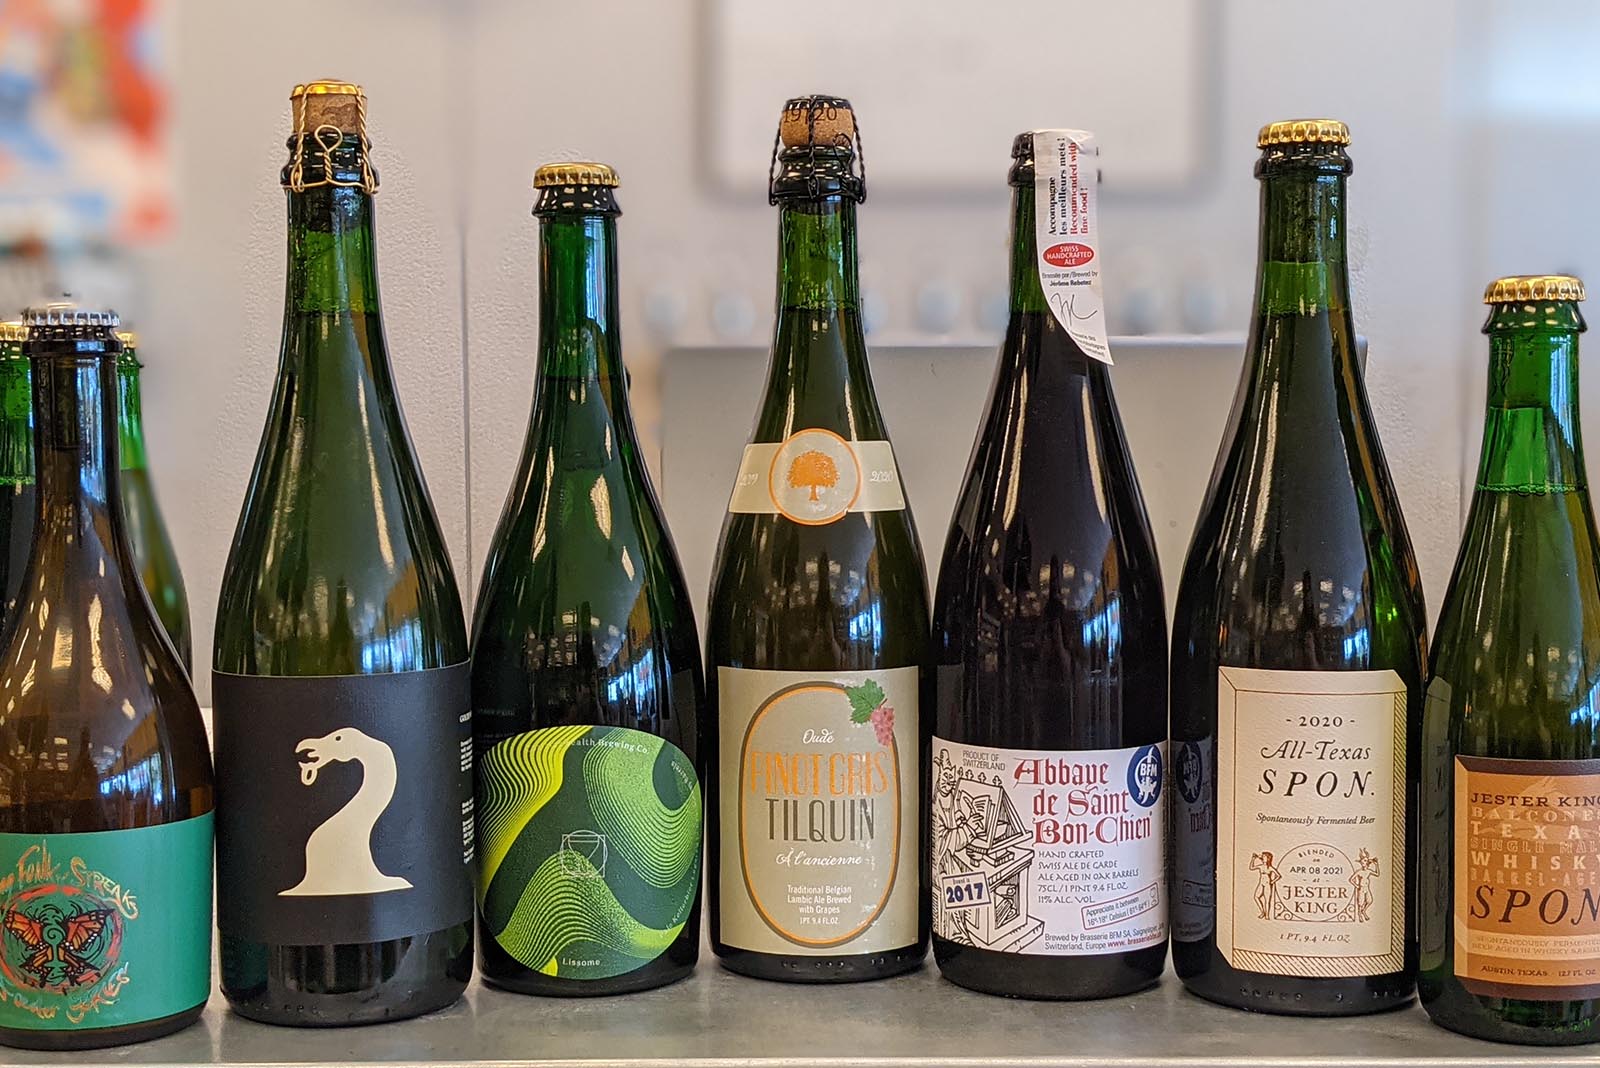 Beers in Green Bottles: Clearing Up the Bottle Color Conundrum